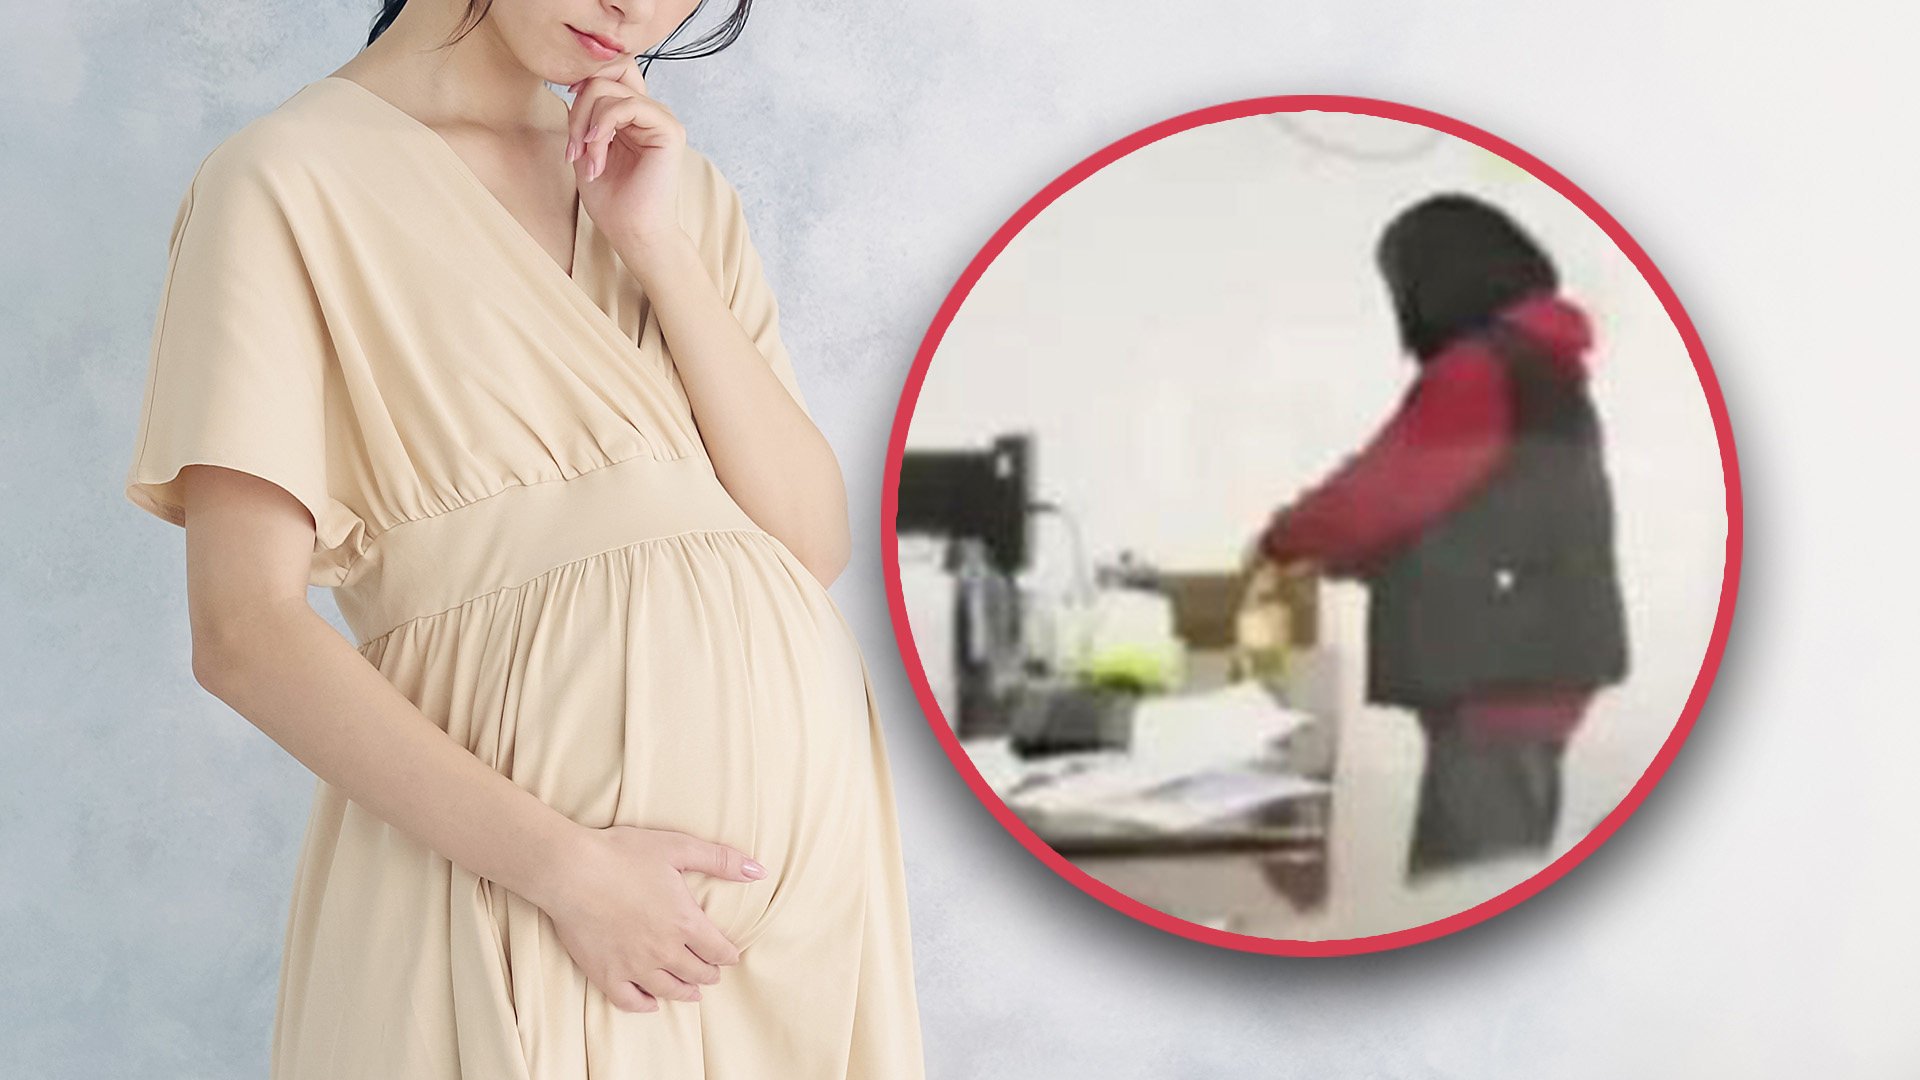 Police in China have launched an investigation after a female office worker was captured on camera pouring a potentially toxic substance into the drink of a pregnant colleague. Photo: SCMP composite/Shutterstock/Weibo